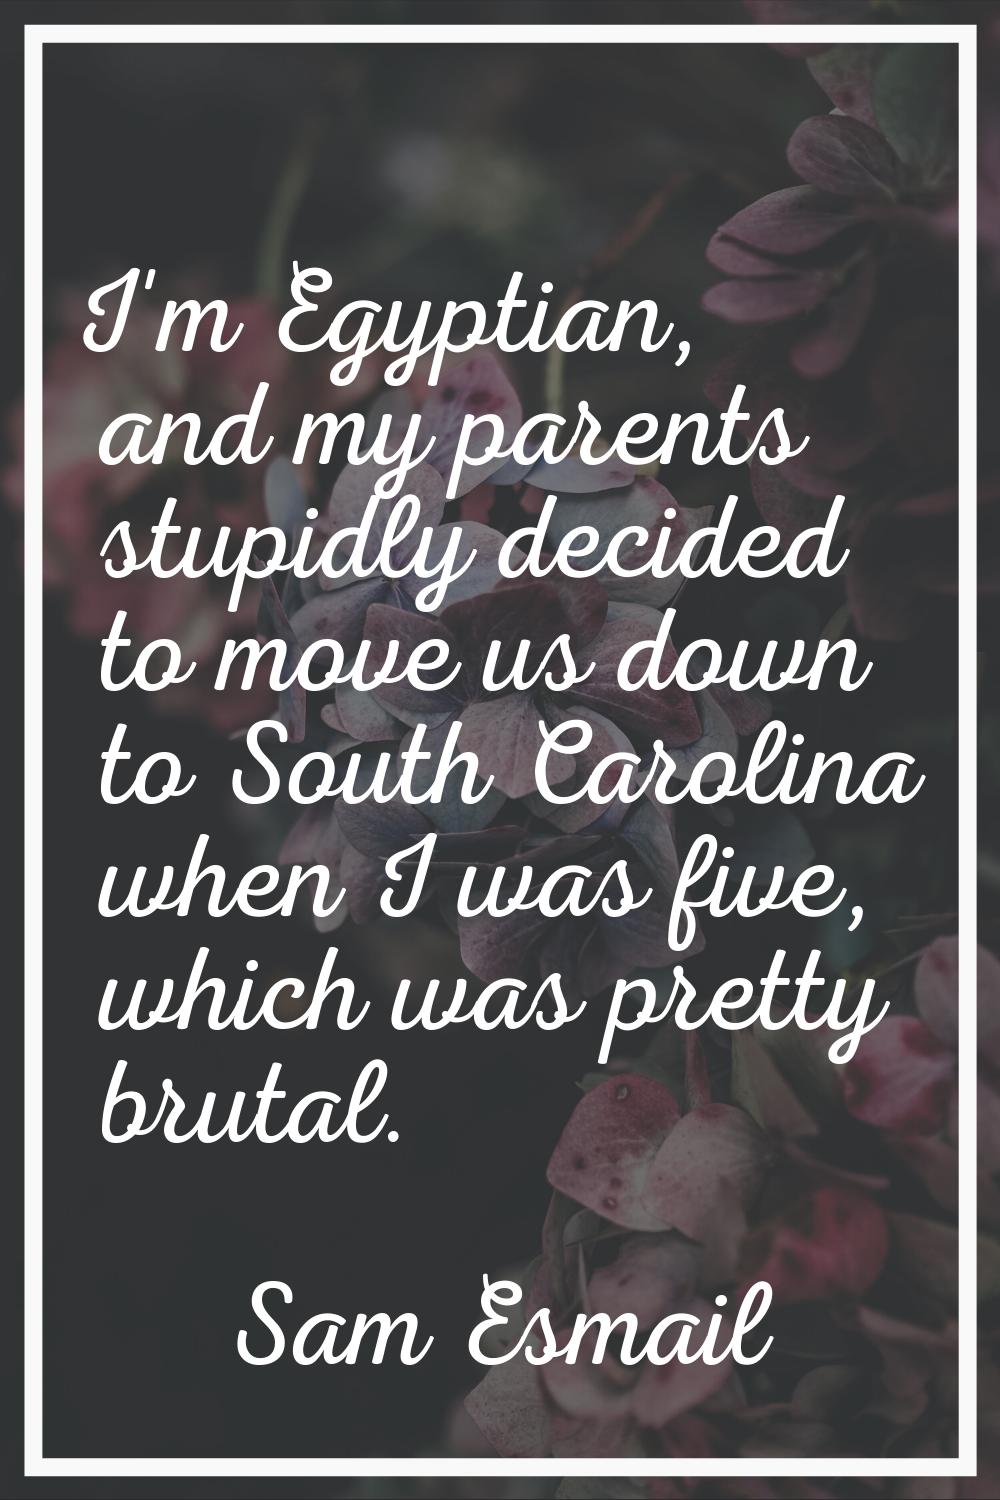 I'm Egyptian, and my parents stupidly decided to move us down to South Carolina when I was five, wh